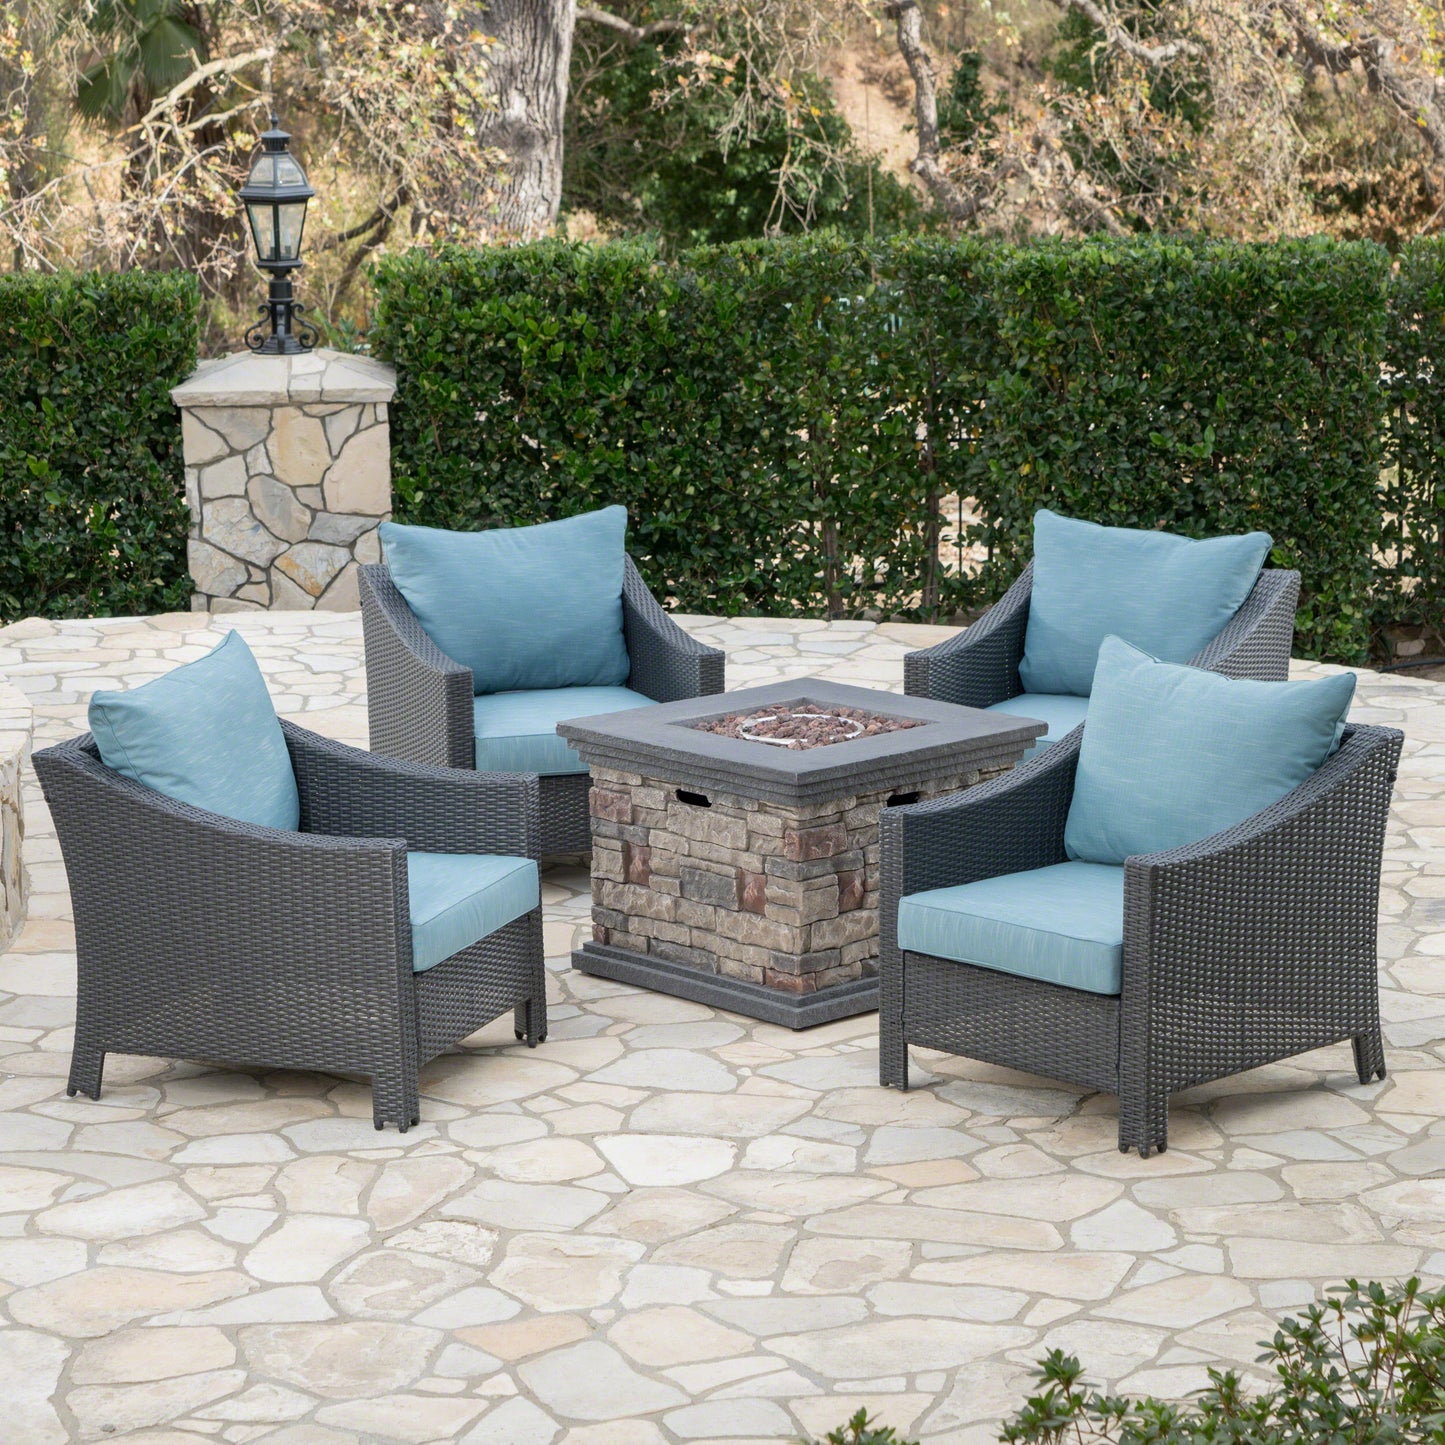 Aspen Outdoor 5 Piece Gray Wicker Chat Set with Stone Finished Fire Pit